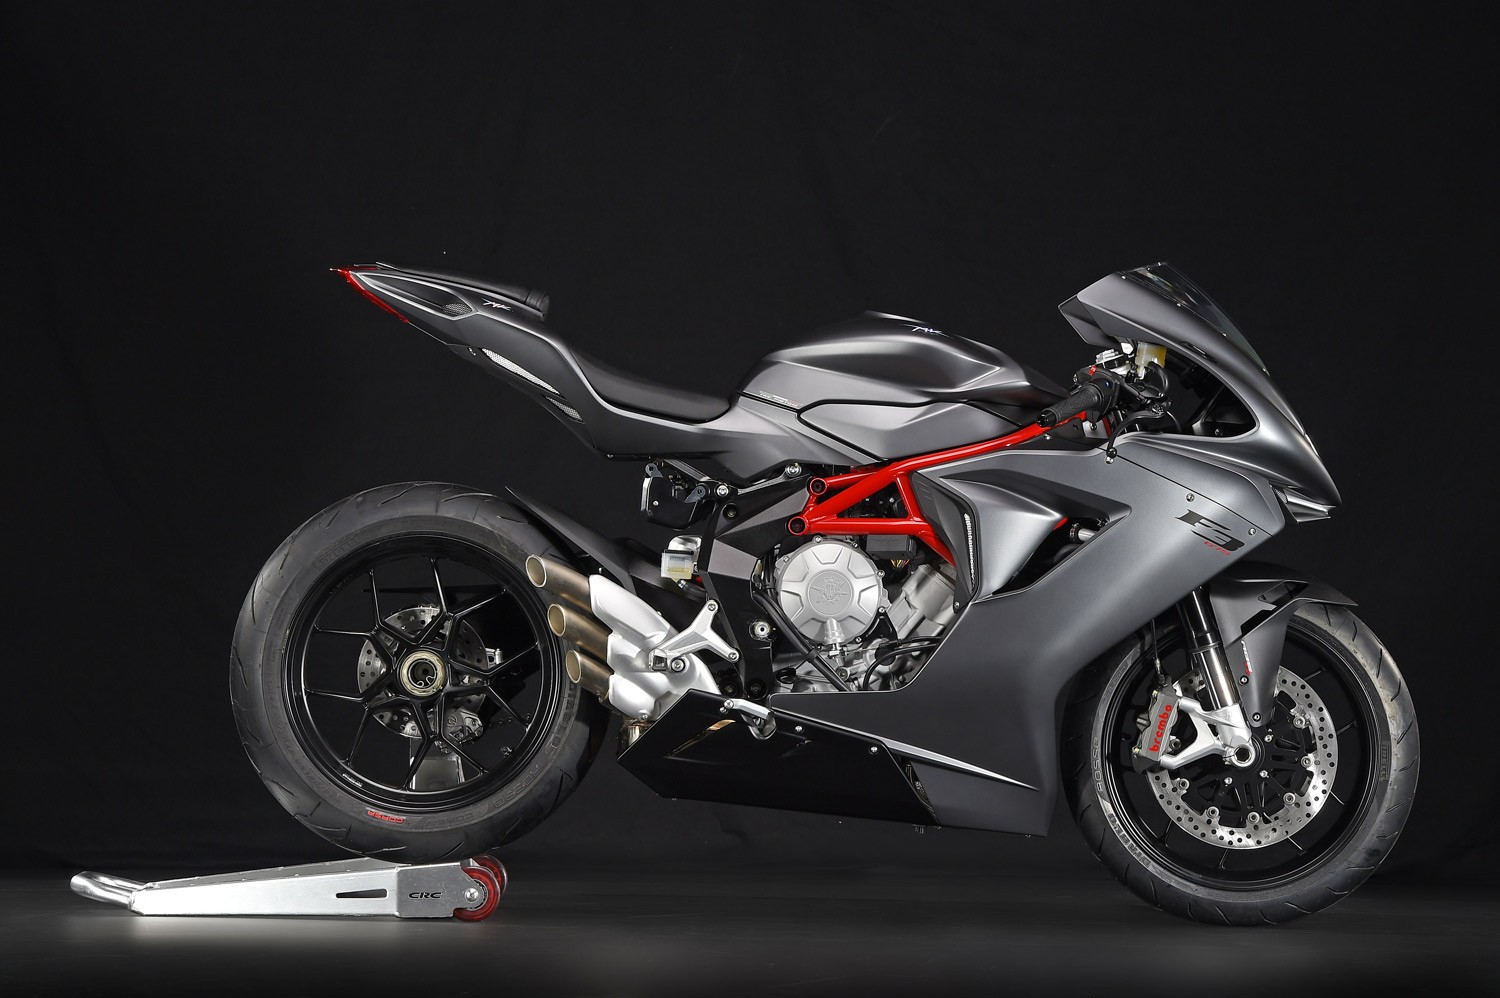 General 1500x998 motorcycle MV agusta MV Agusta f3 800 Silver Motorcycles dark background simple background vehicle Italian motorcycles